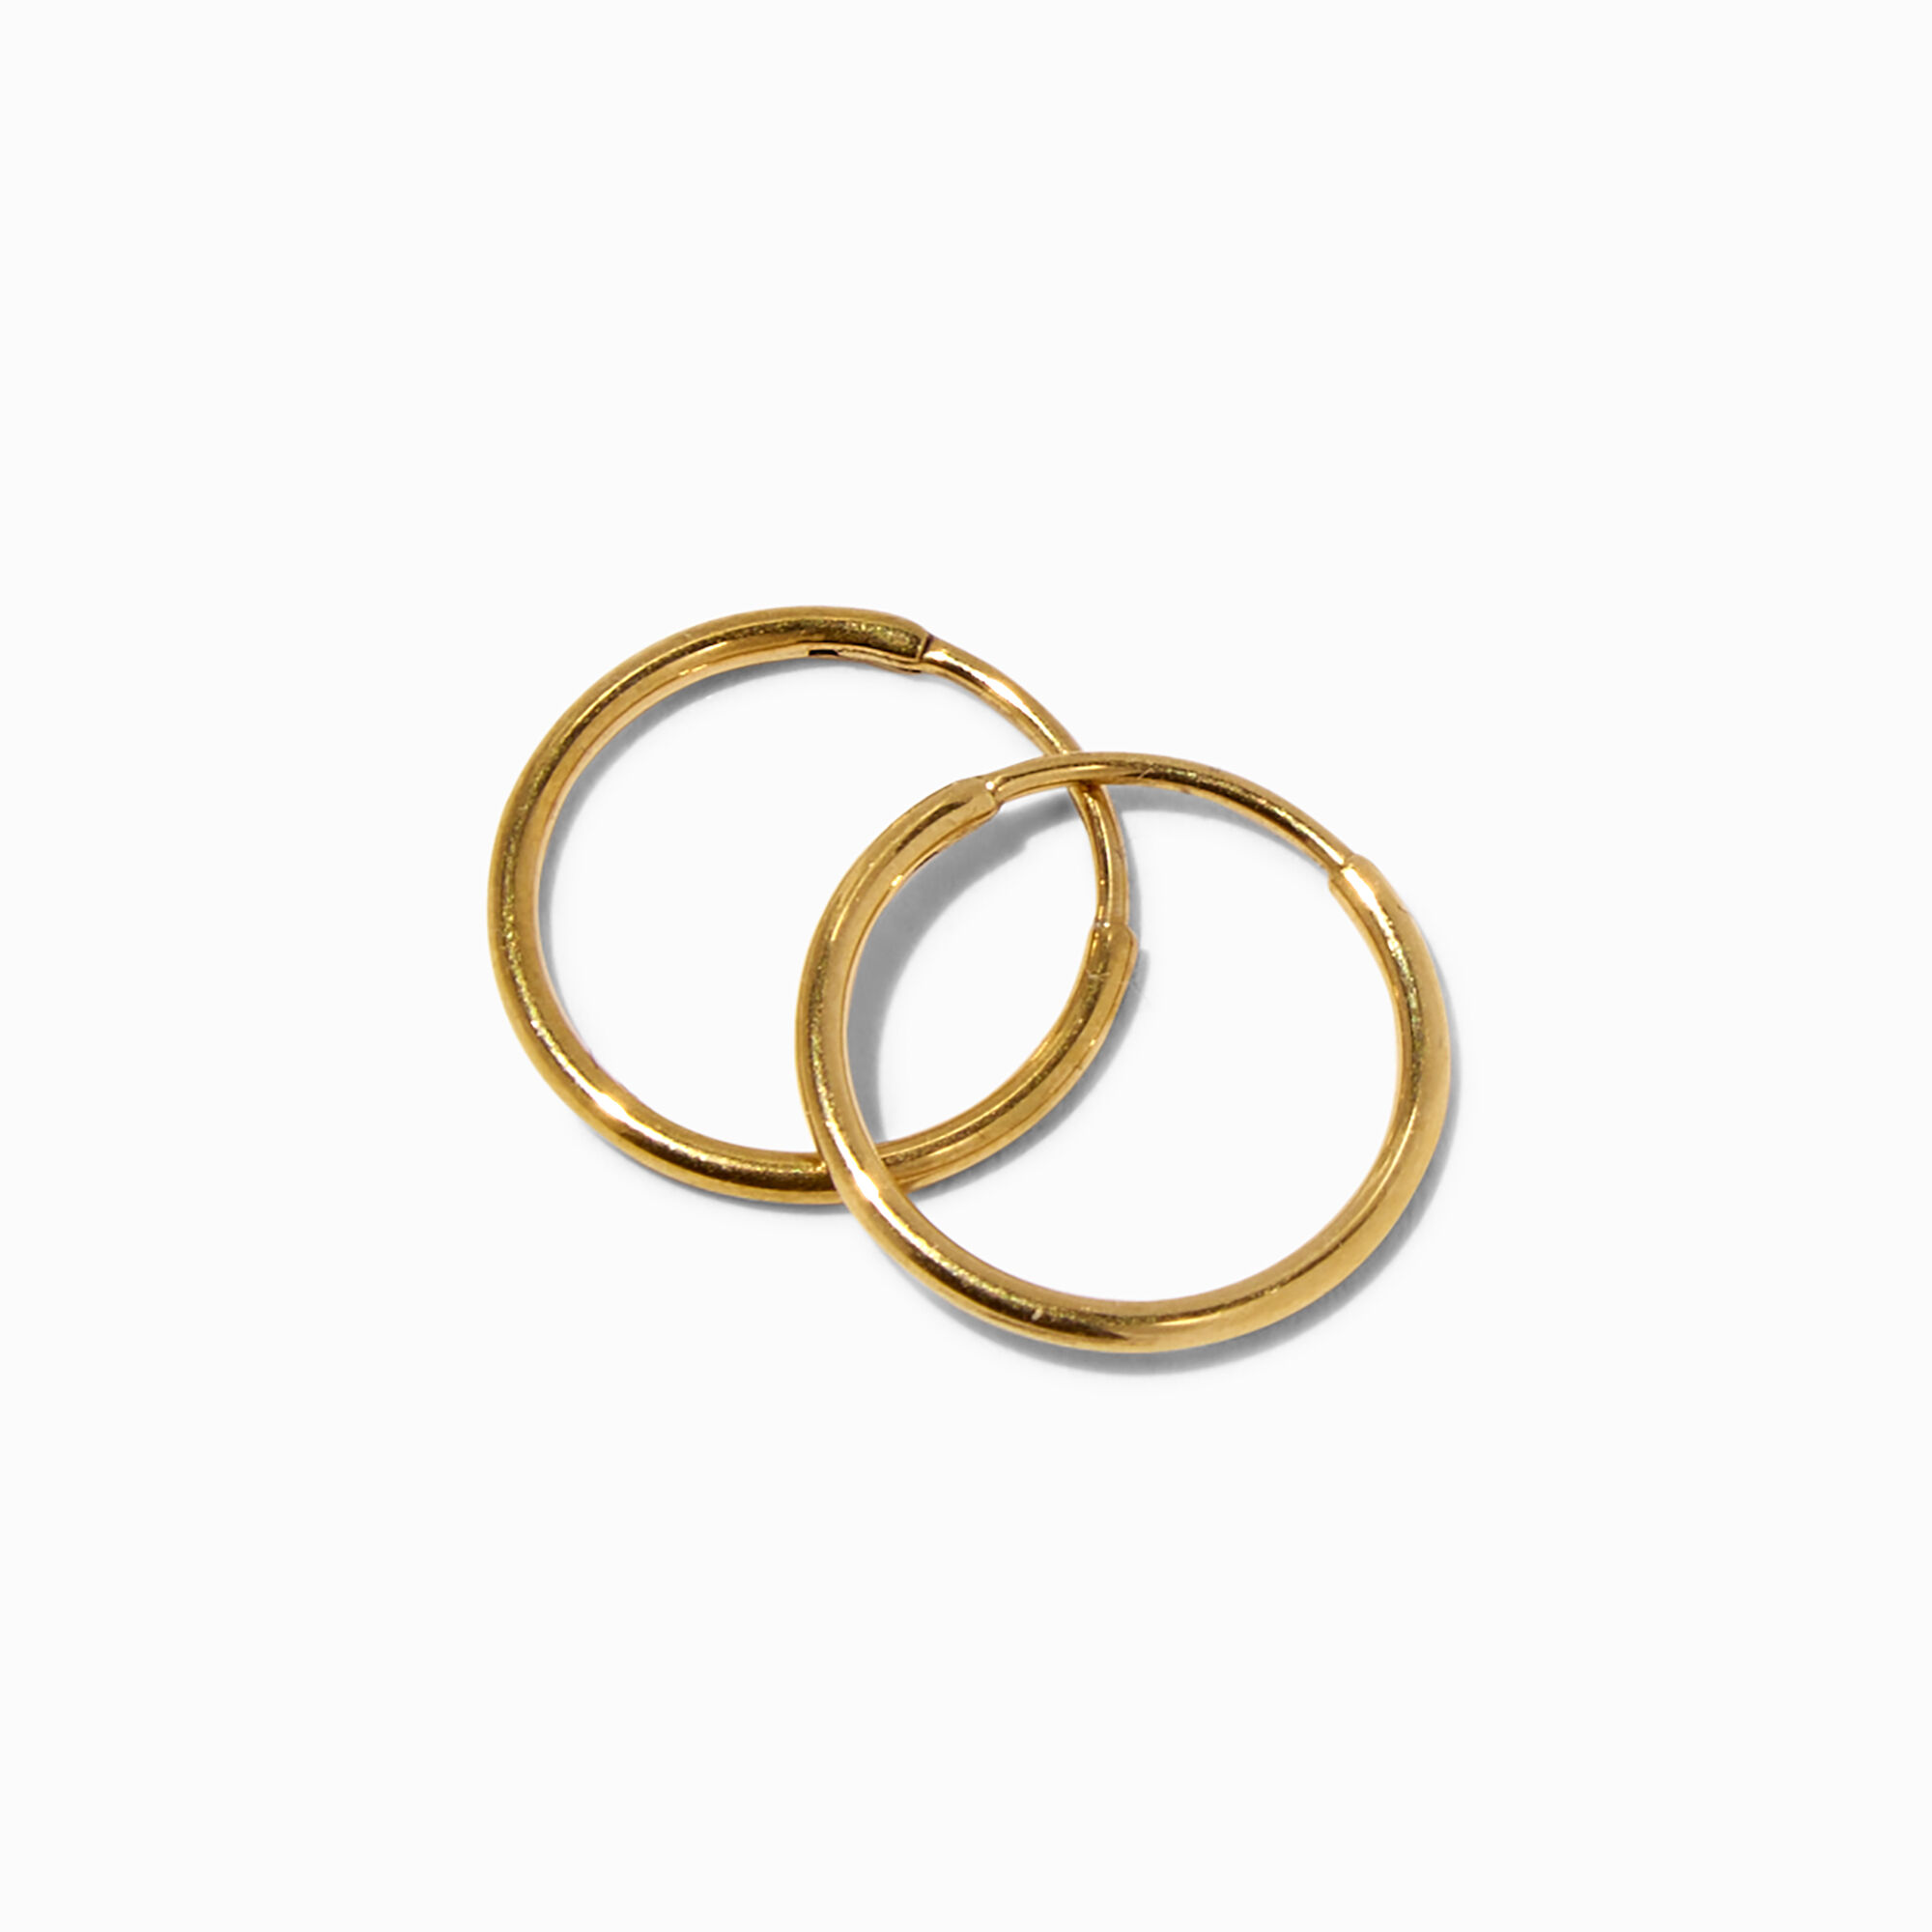 View Claires Titanium 12MM Endless Hoop Earrings Gold information